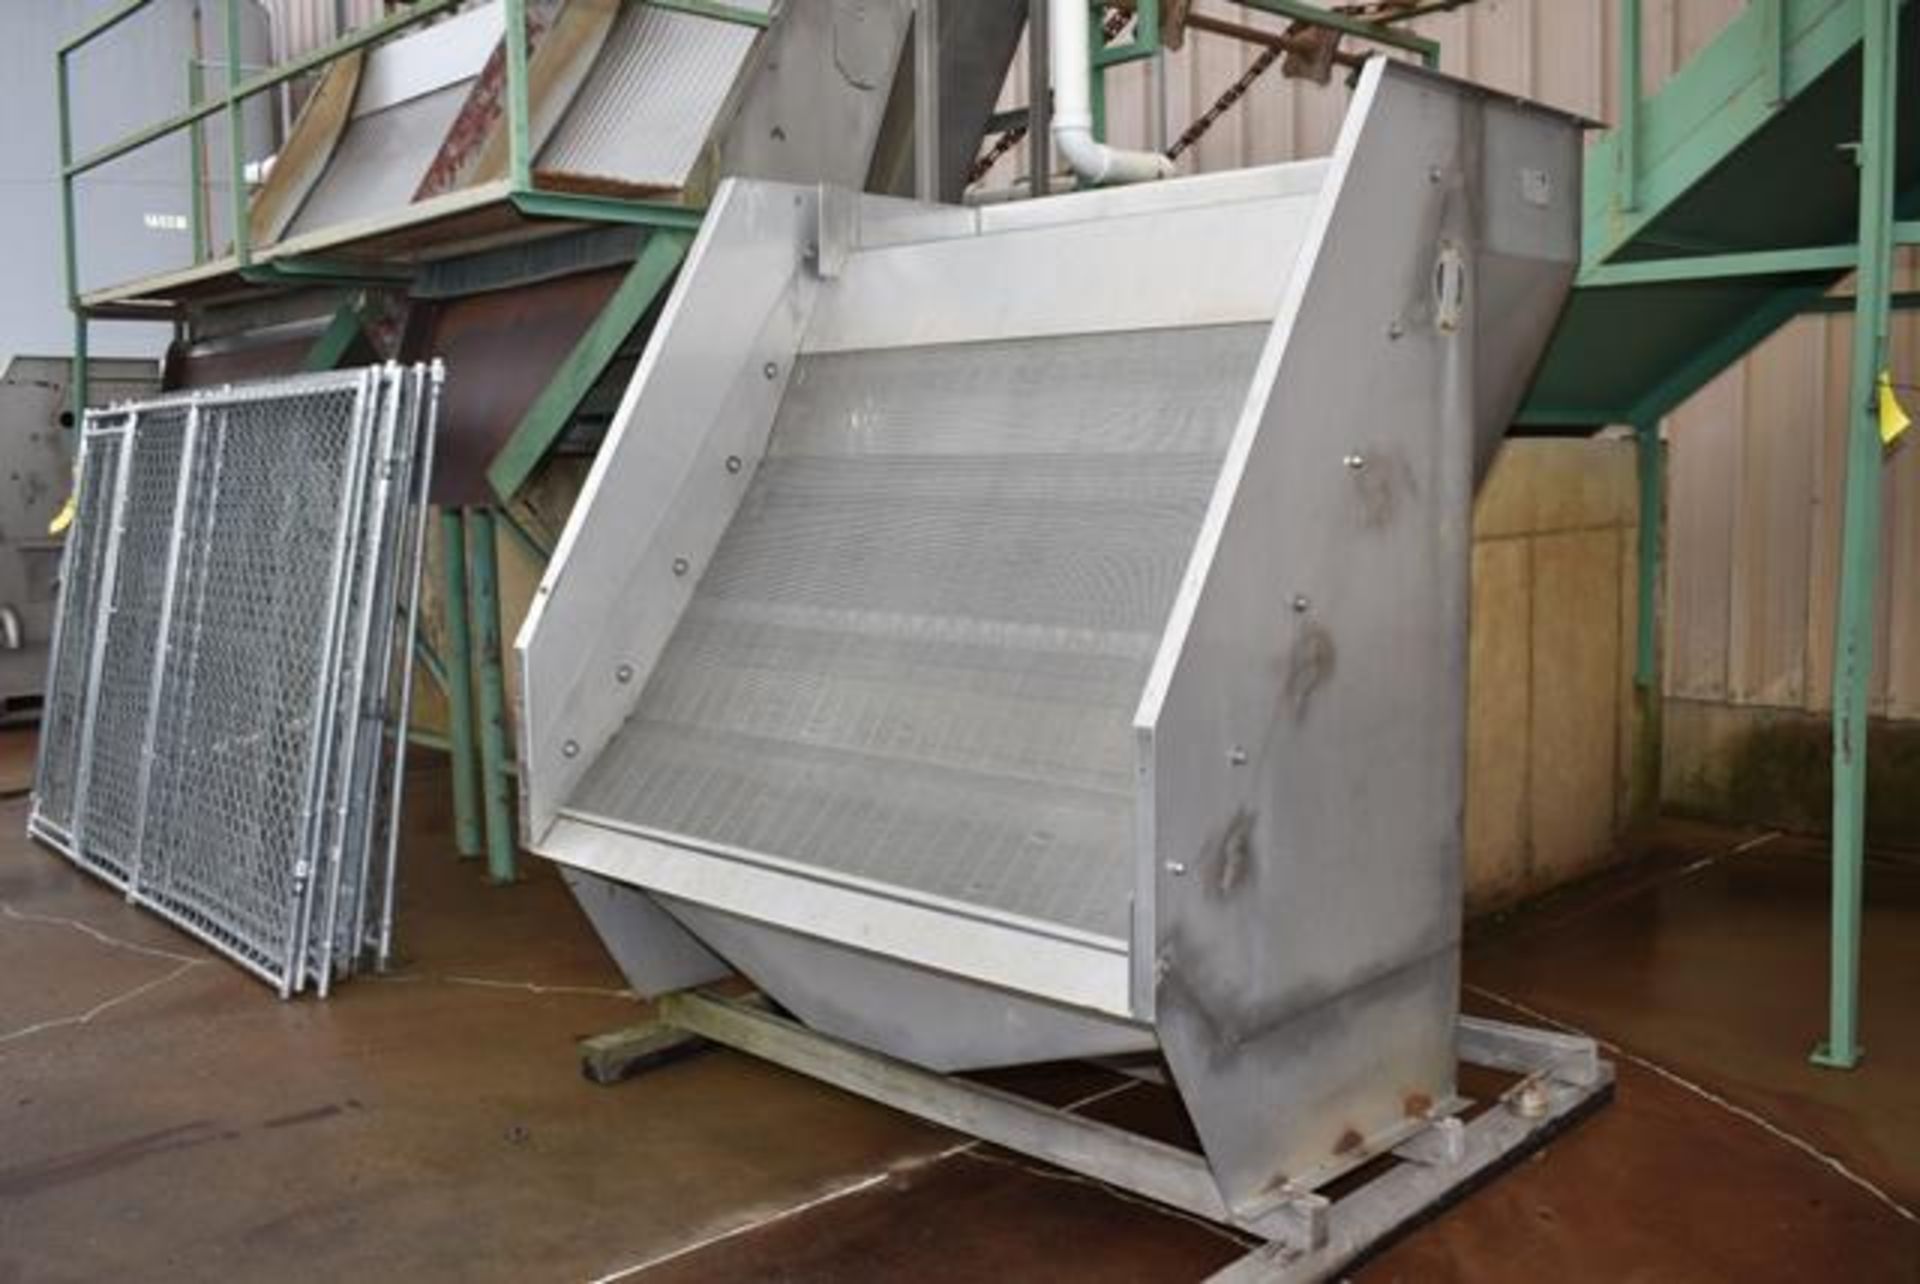 Bauer 72"L x 42"H Hydrasieve, Equipped with Stainless Steel Contacts, Loading Fee: $250